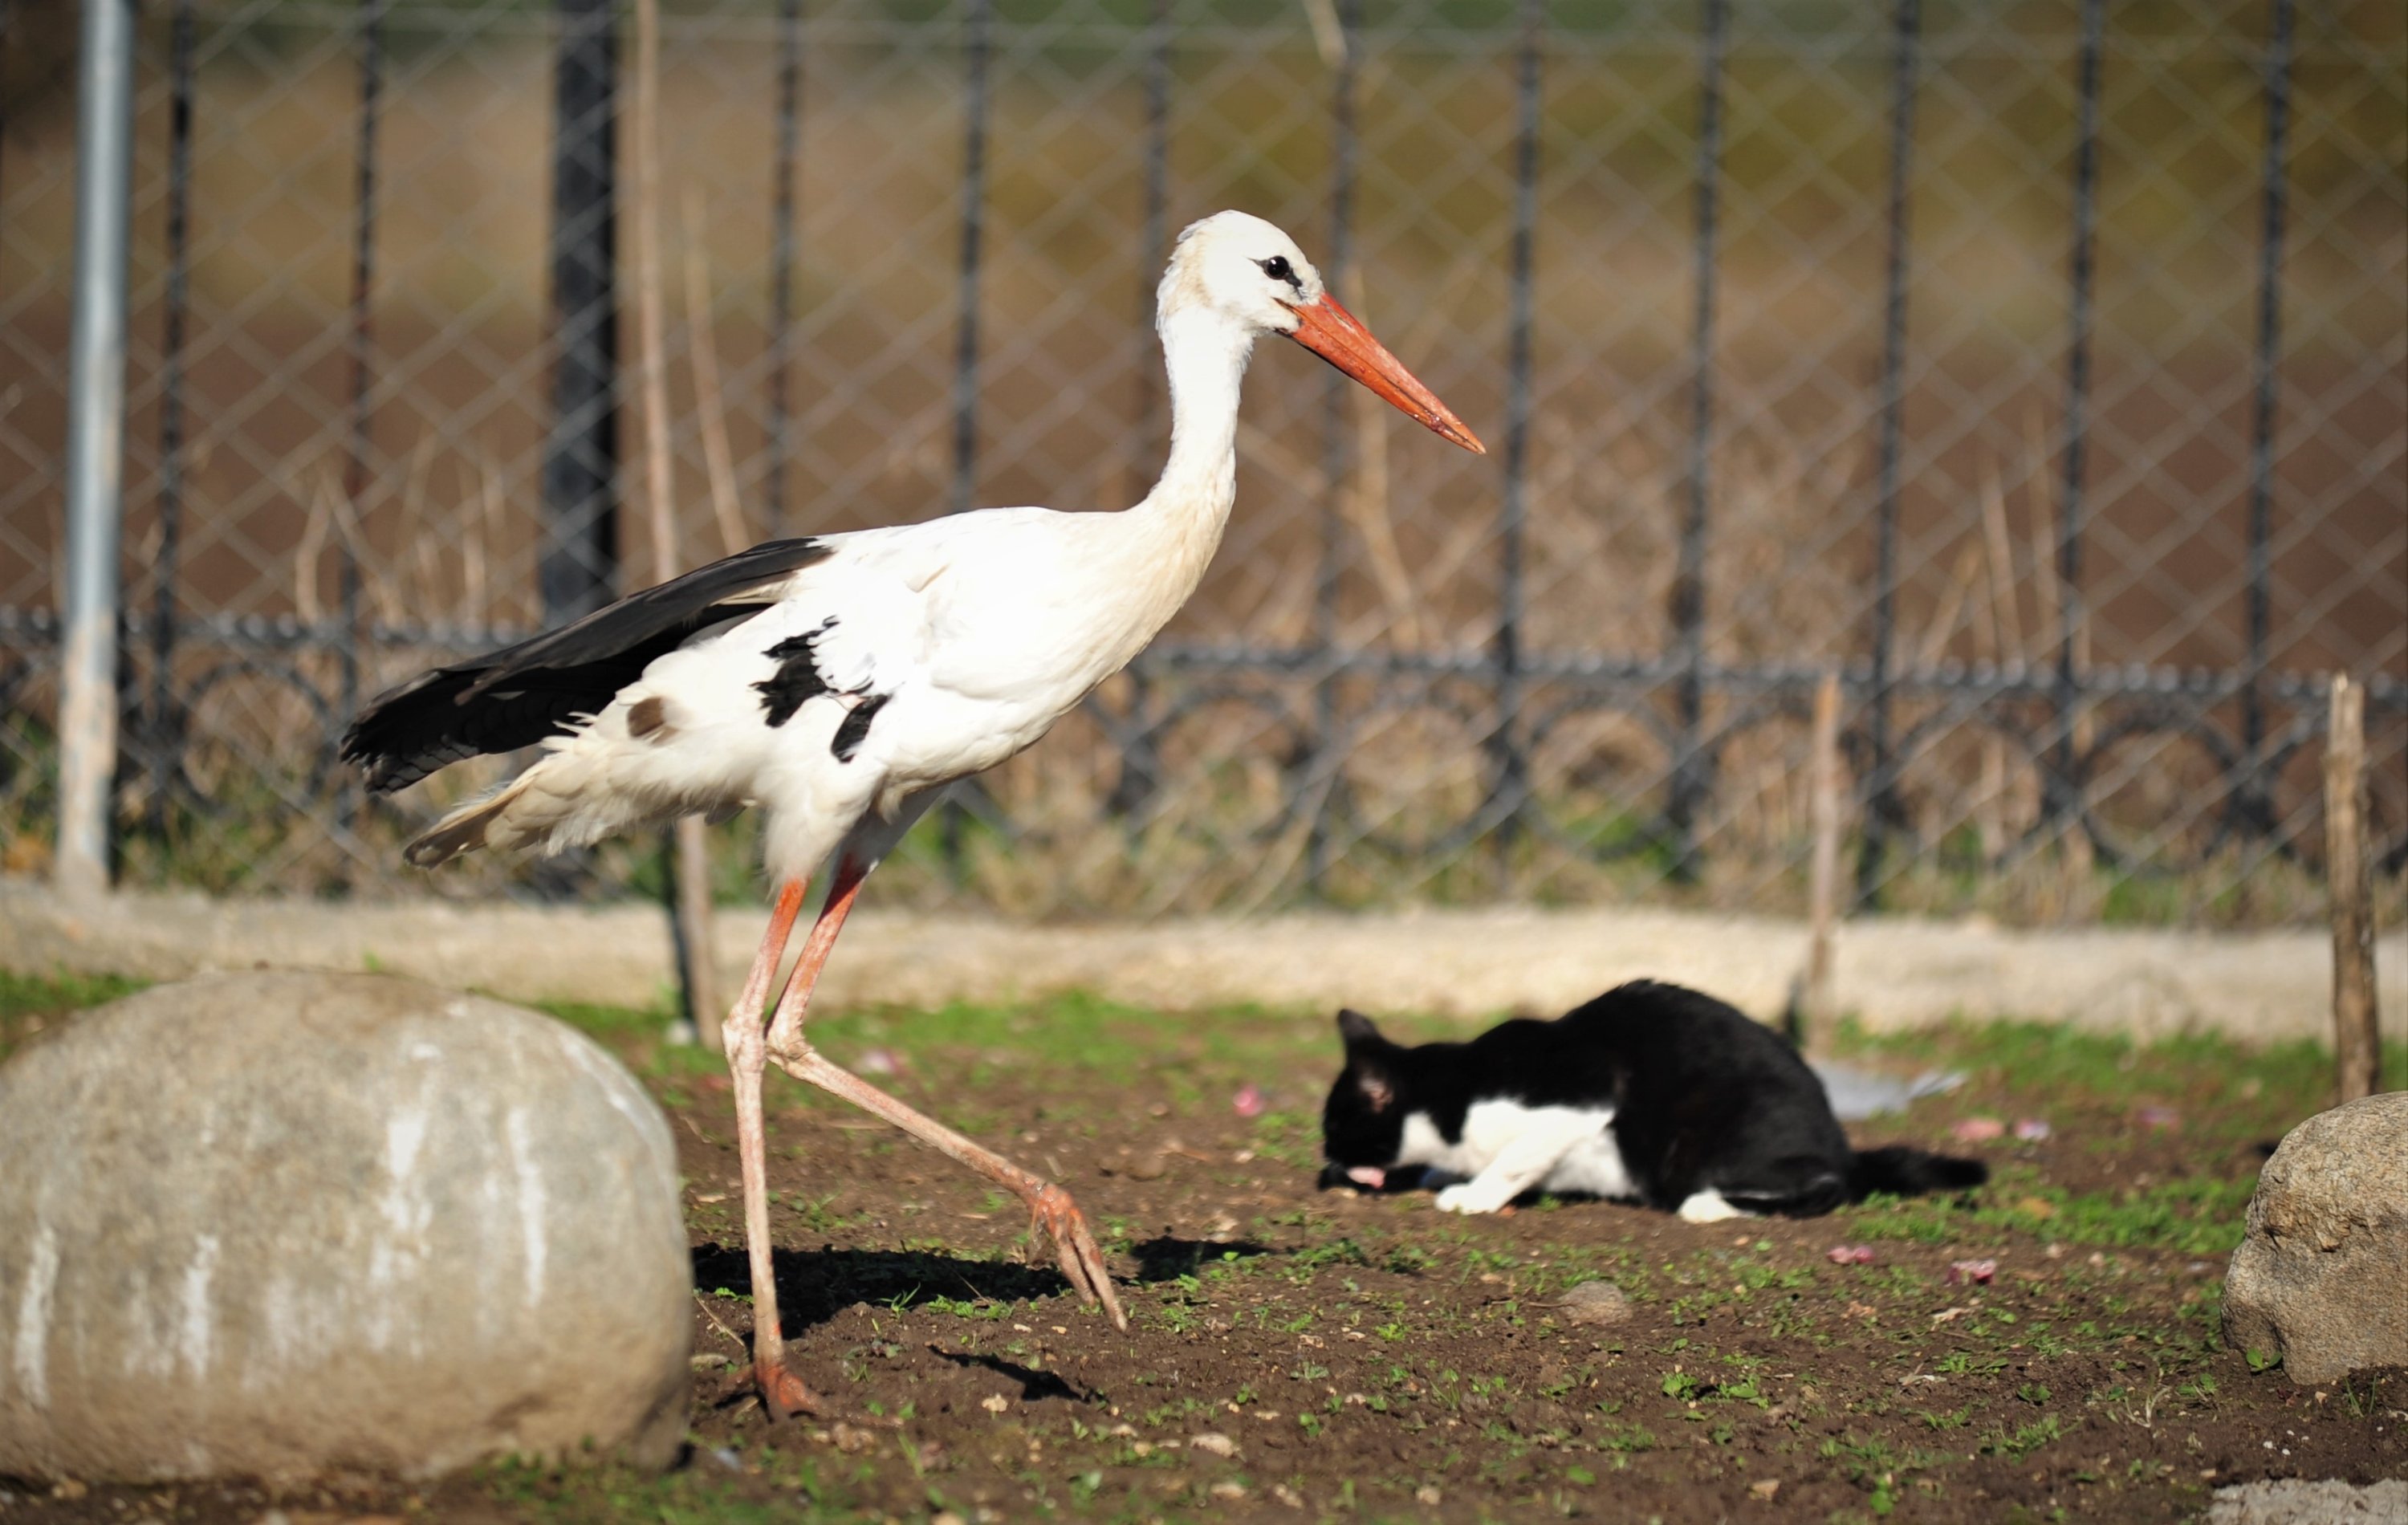 A stork and cat together at the Animal Rights Federation (HAYTAP) "Retired Animals Farm" in Bursa, Turkey, Nov. 10, 2021. (DHA Photo)